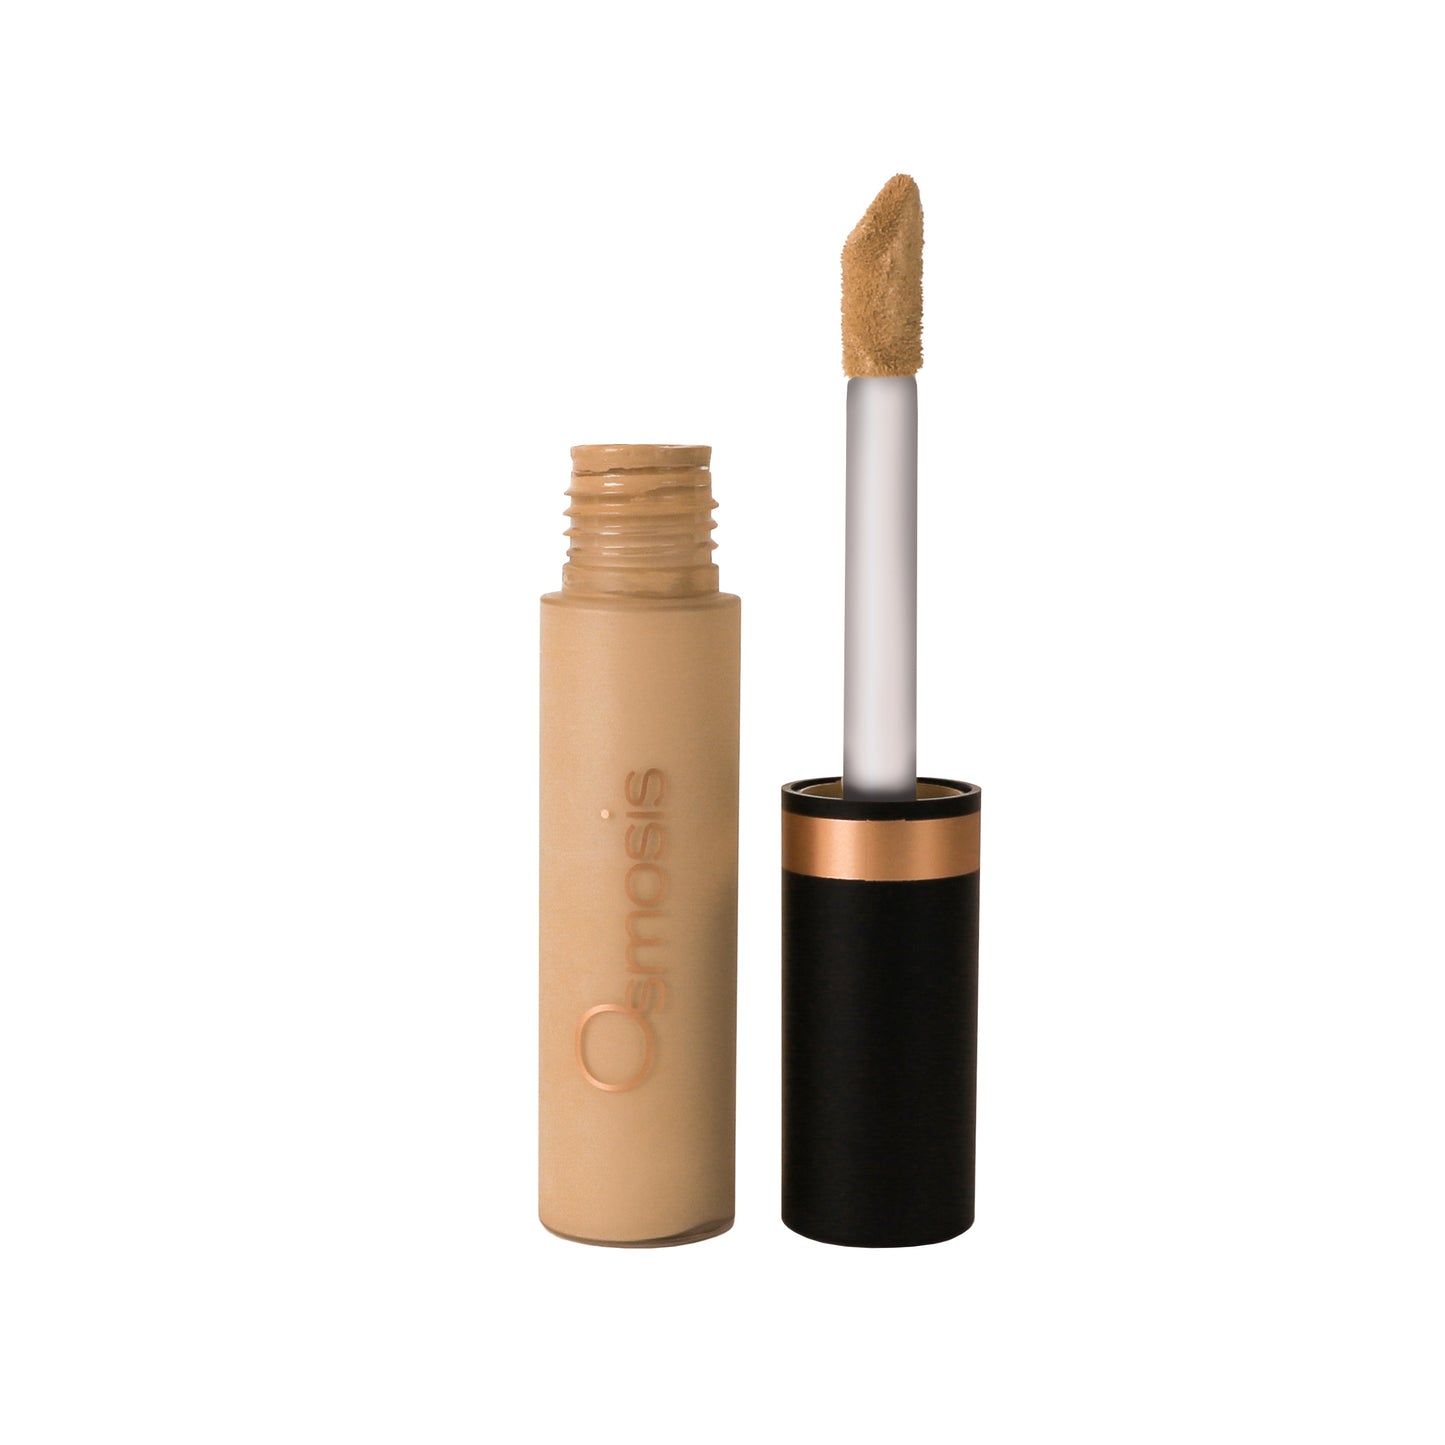 Flawless concealer from osmosis beauty open Sand shade